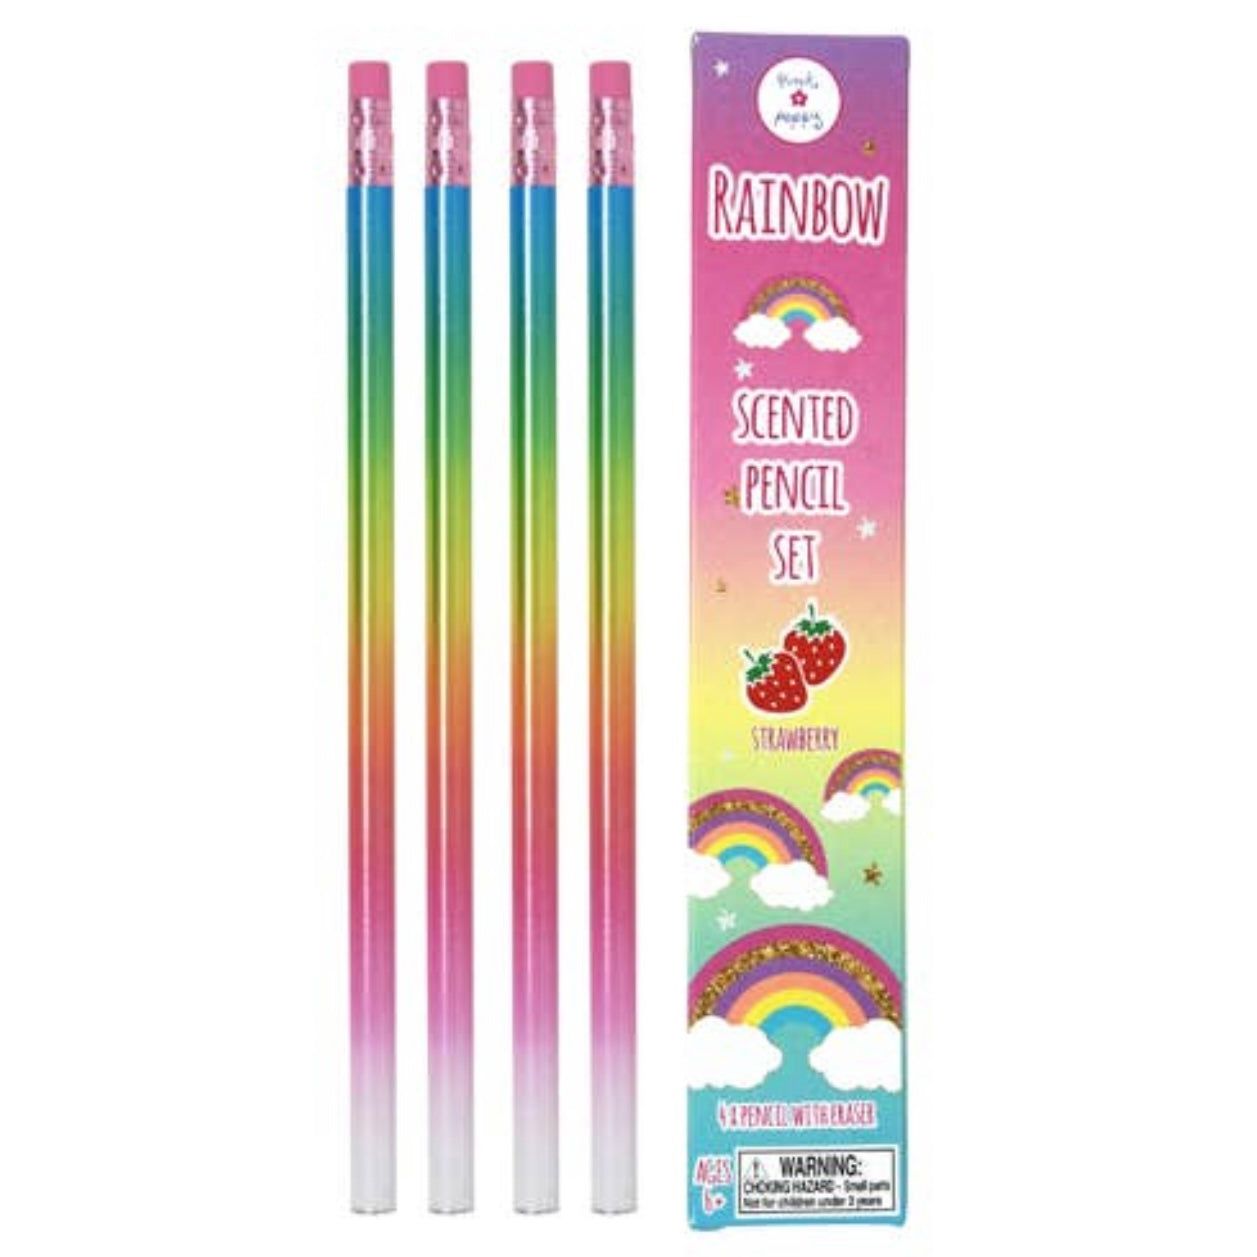 Rainbow Scented Pencils - 4 Pack